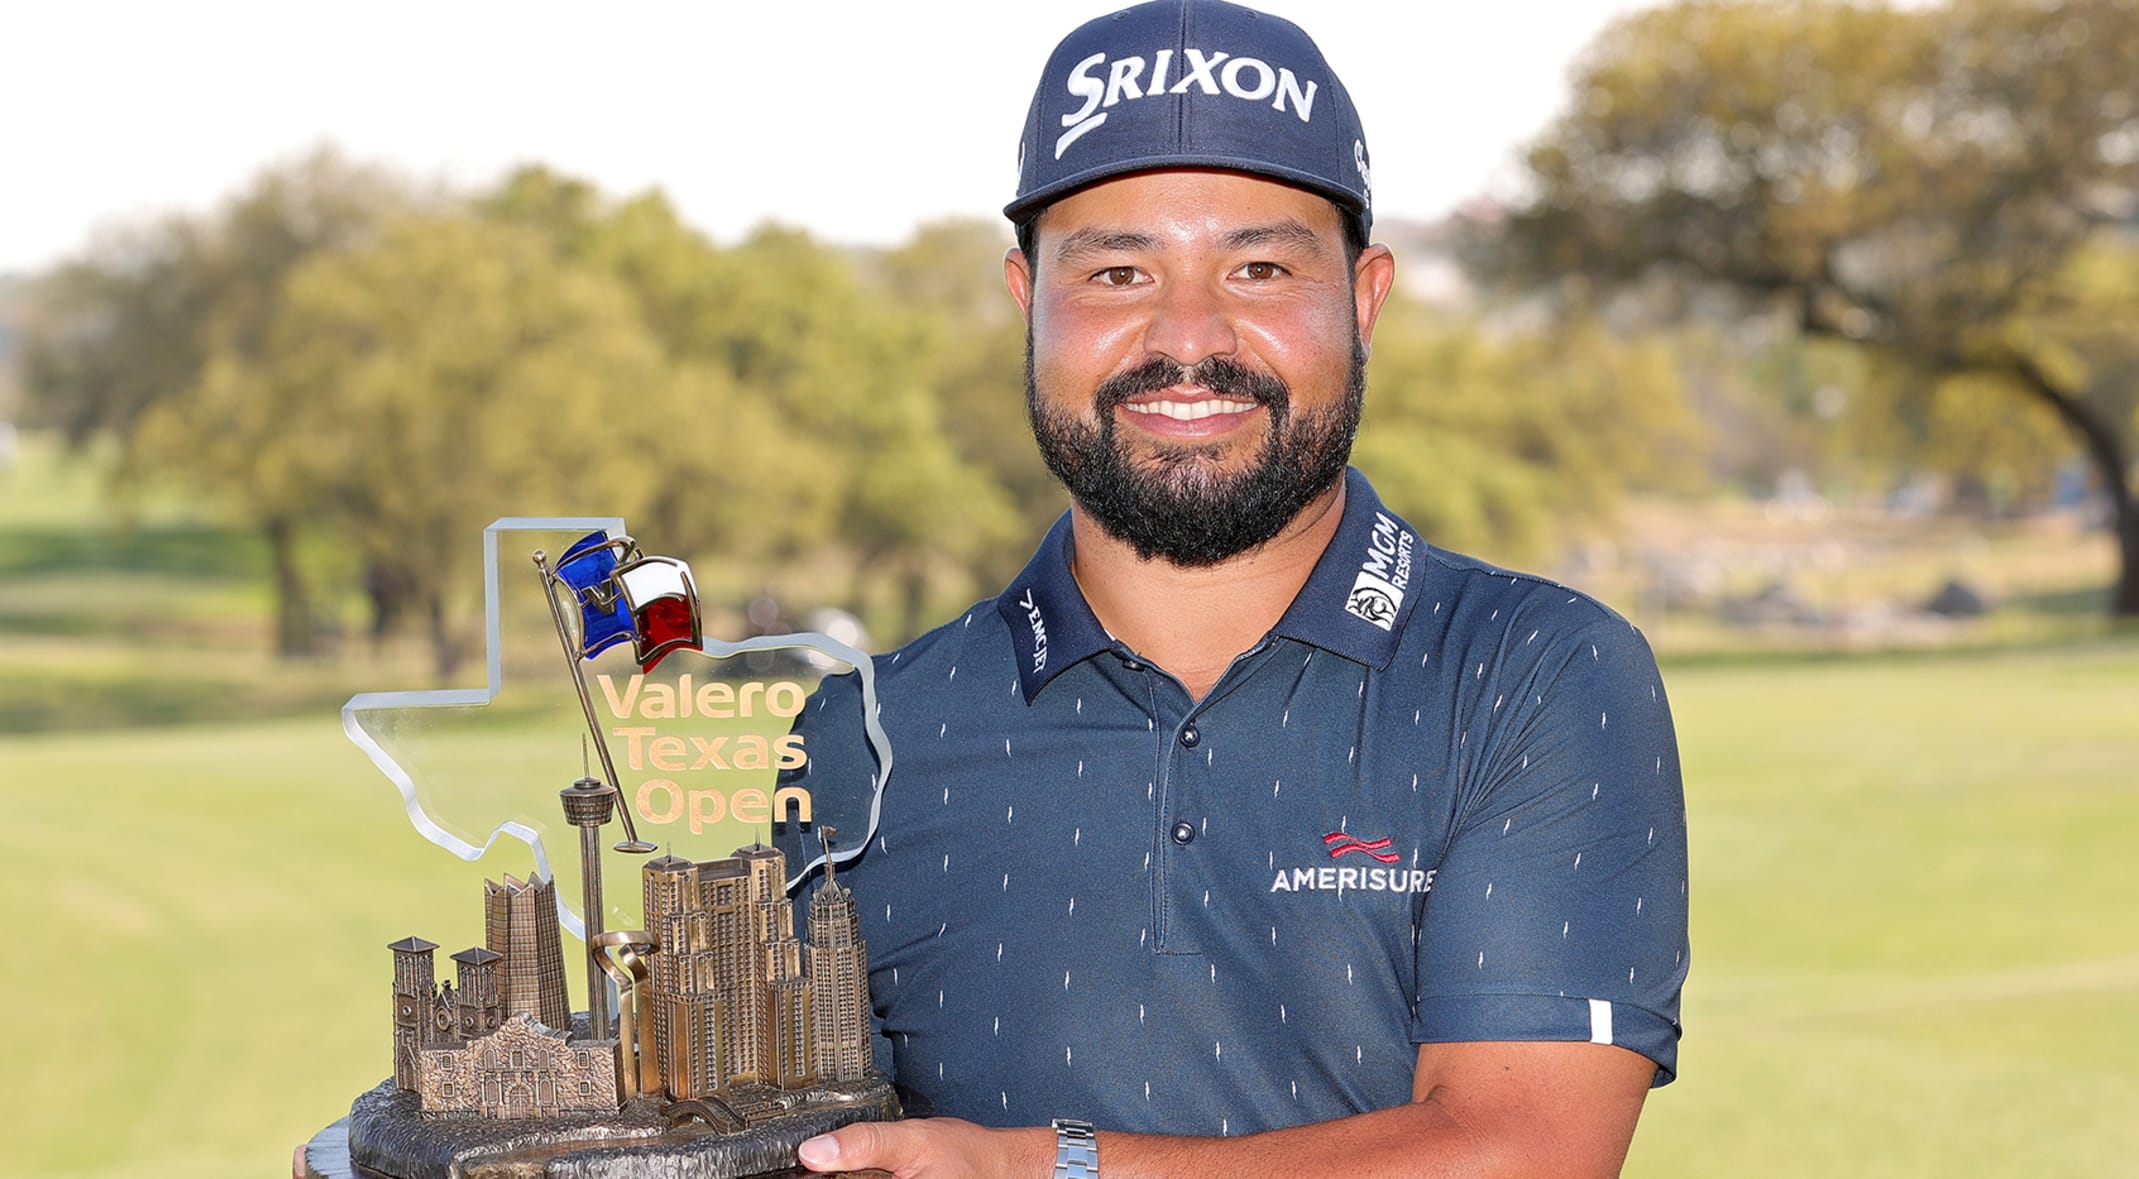 J.J. Spaun overcomes doubts to secure first TOUR title at Valero Texas Open